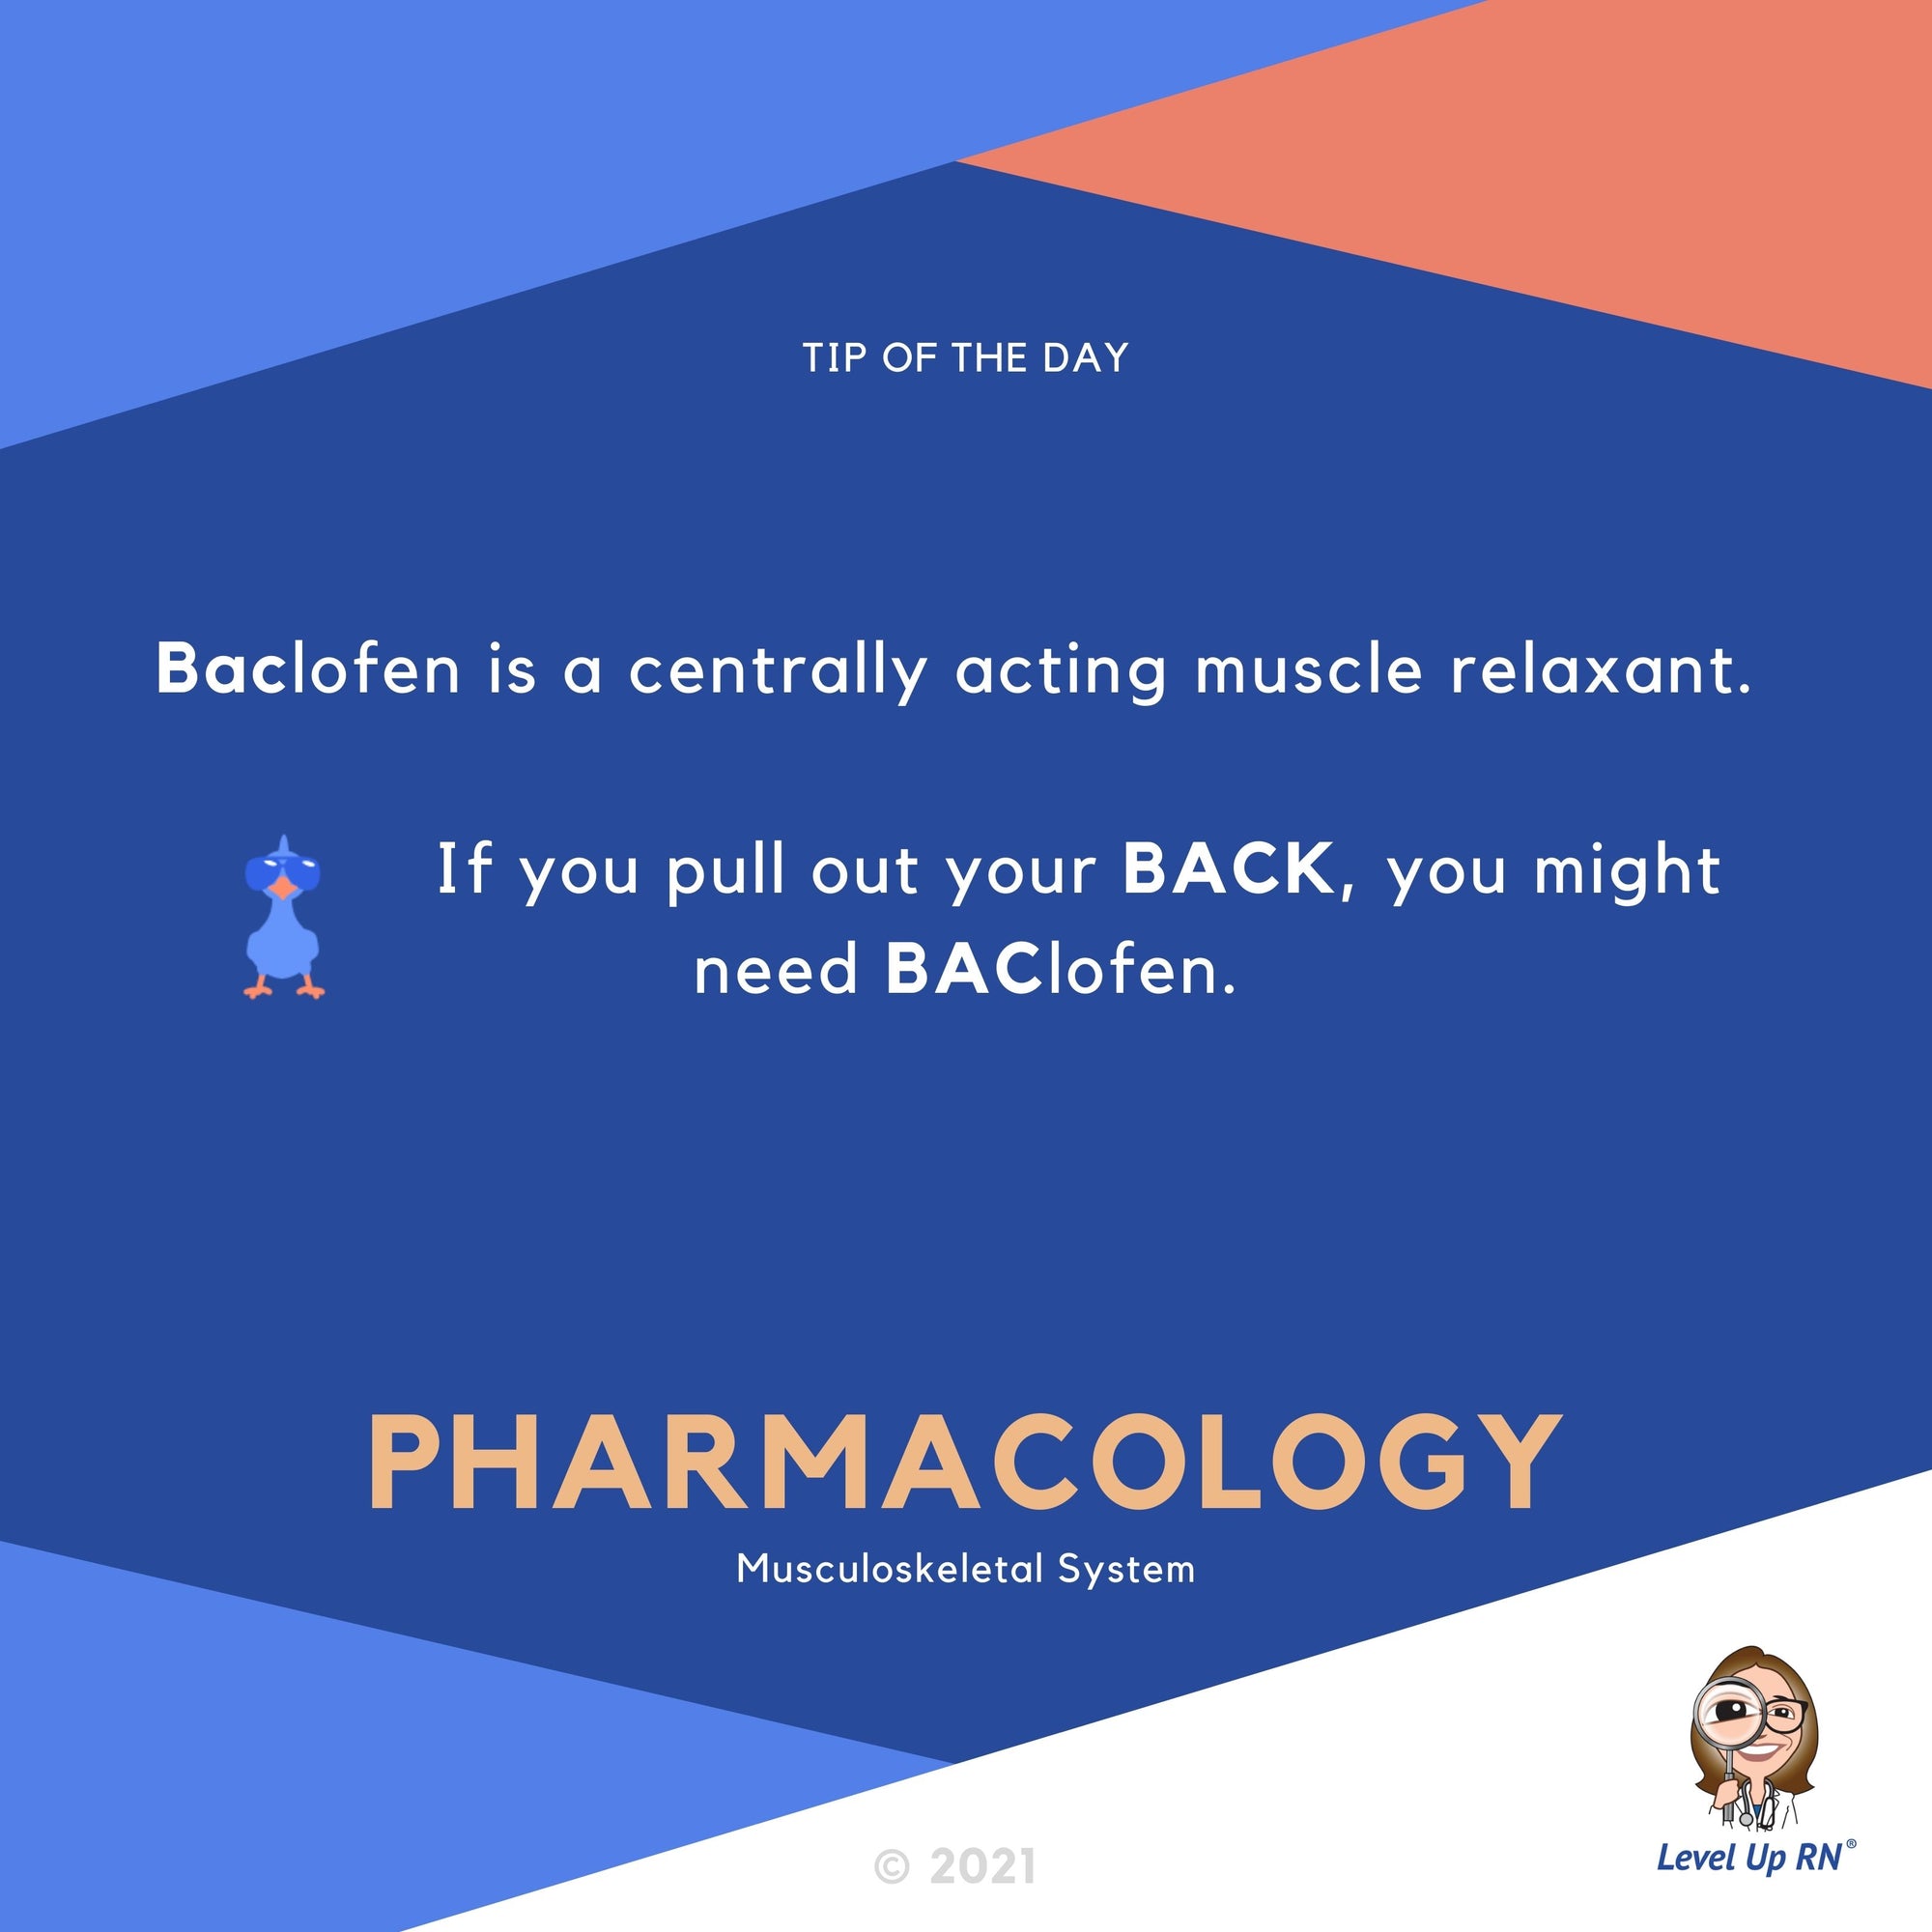 Baclofen is a centrally acting muscle relaxant. If you pull out your BACK, you might need BAClofen.